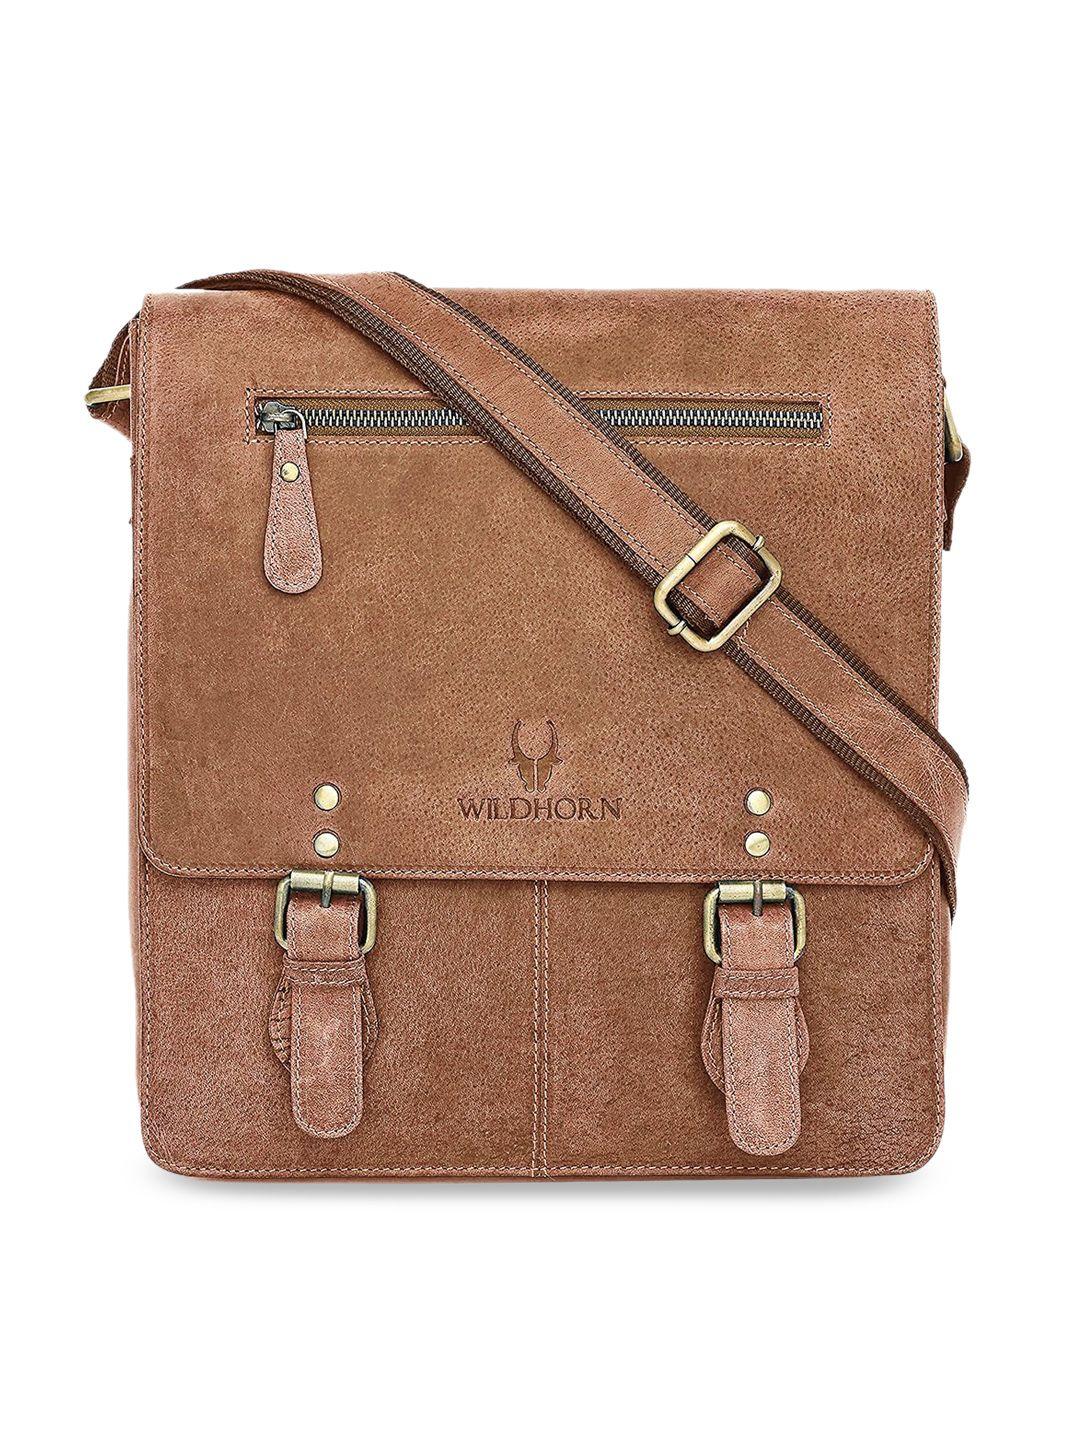 wildhorn tan textured leather structured sling bag